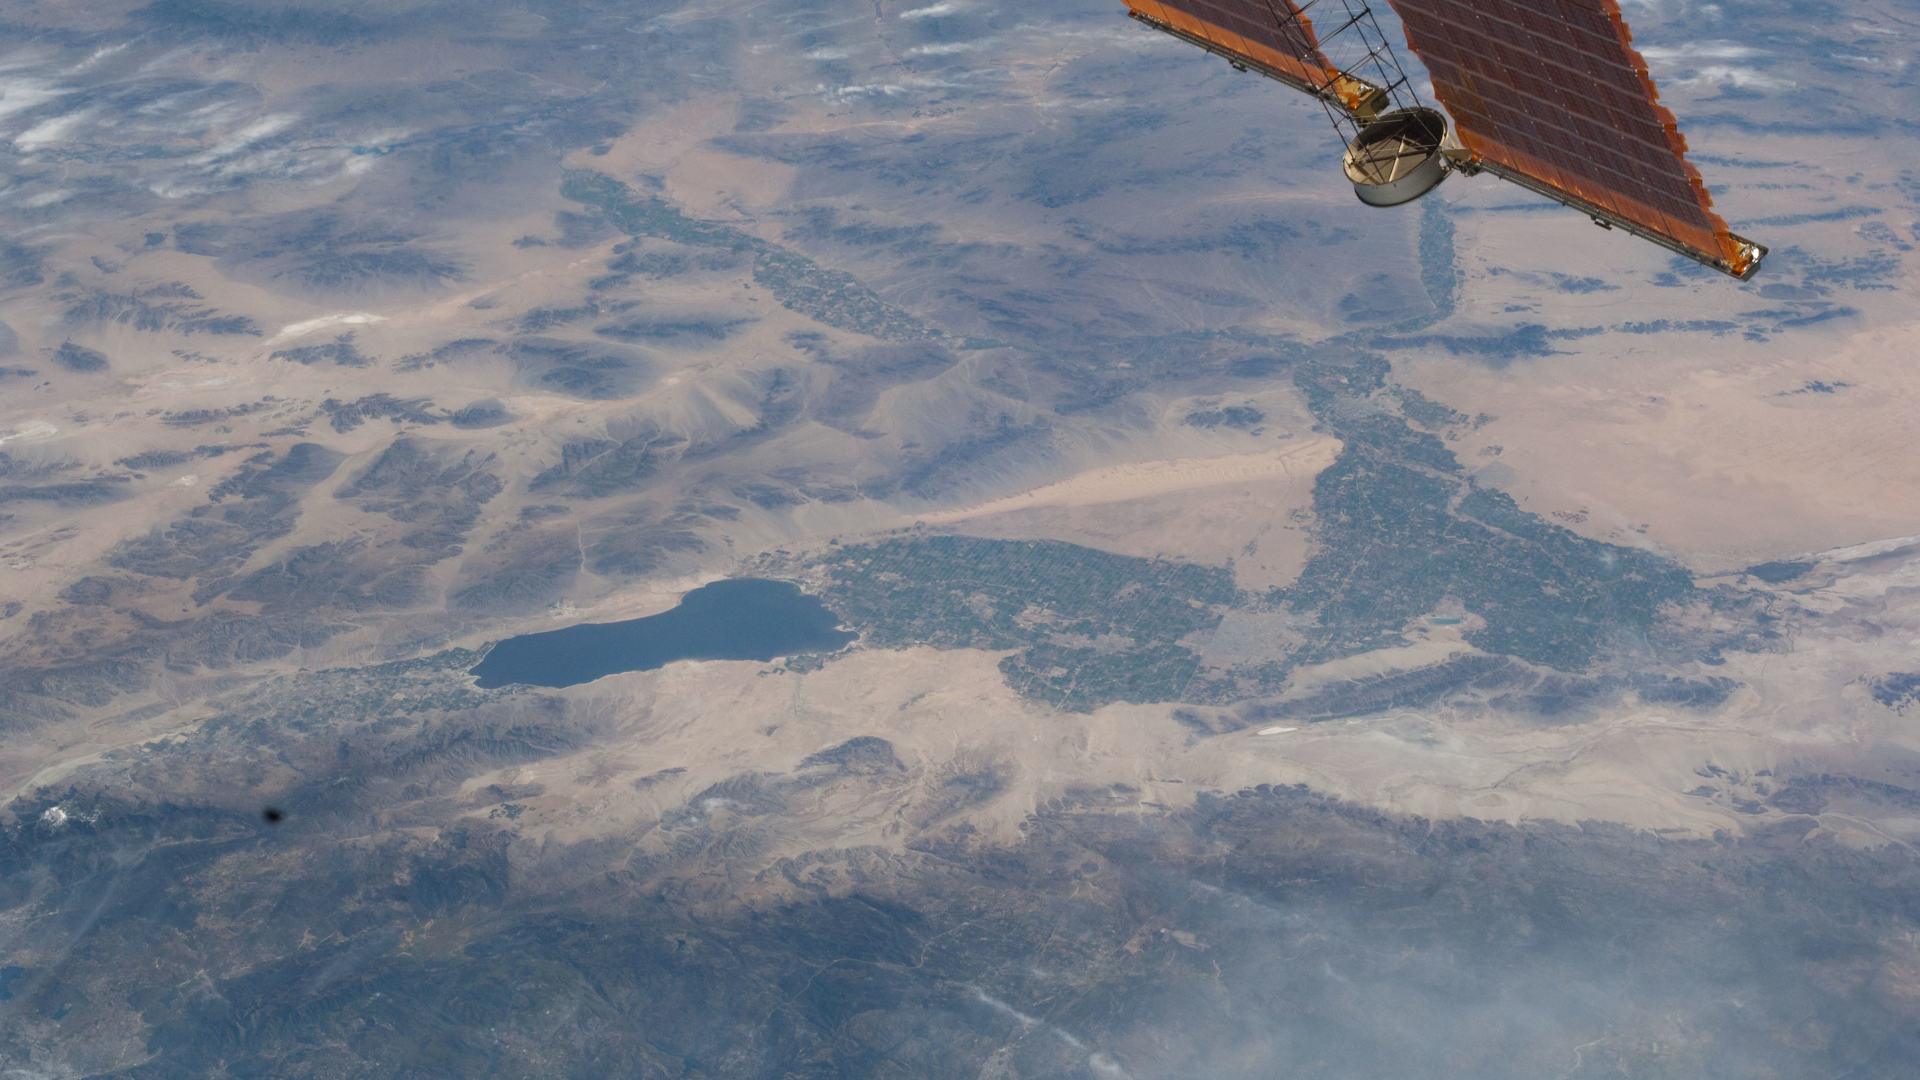 The Salton Sea and Imperial Valley are in the center of this scene photographed from the International Space Station.